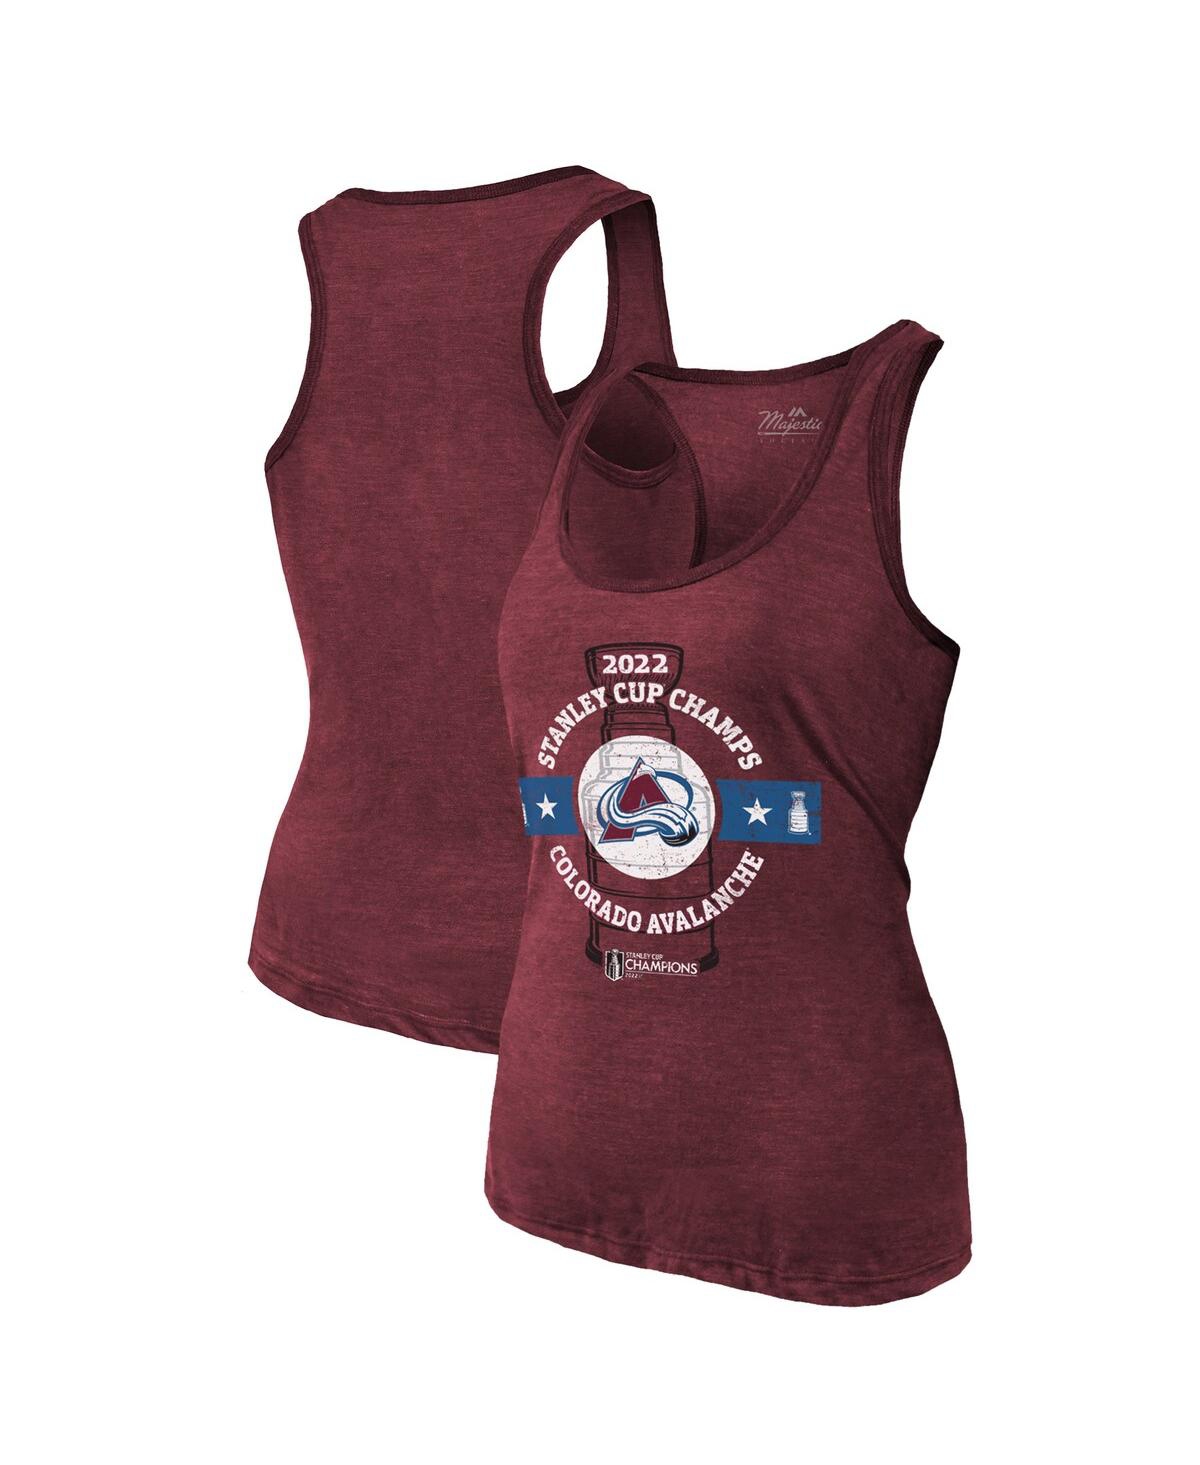 Women's Majestic Threads Burgundy Colorado Avalanche 2022 Stanley Cup Champions Racerback Tank Top - Burgundy